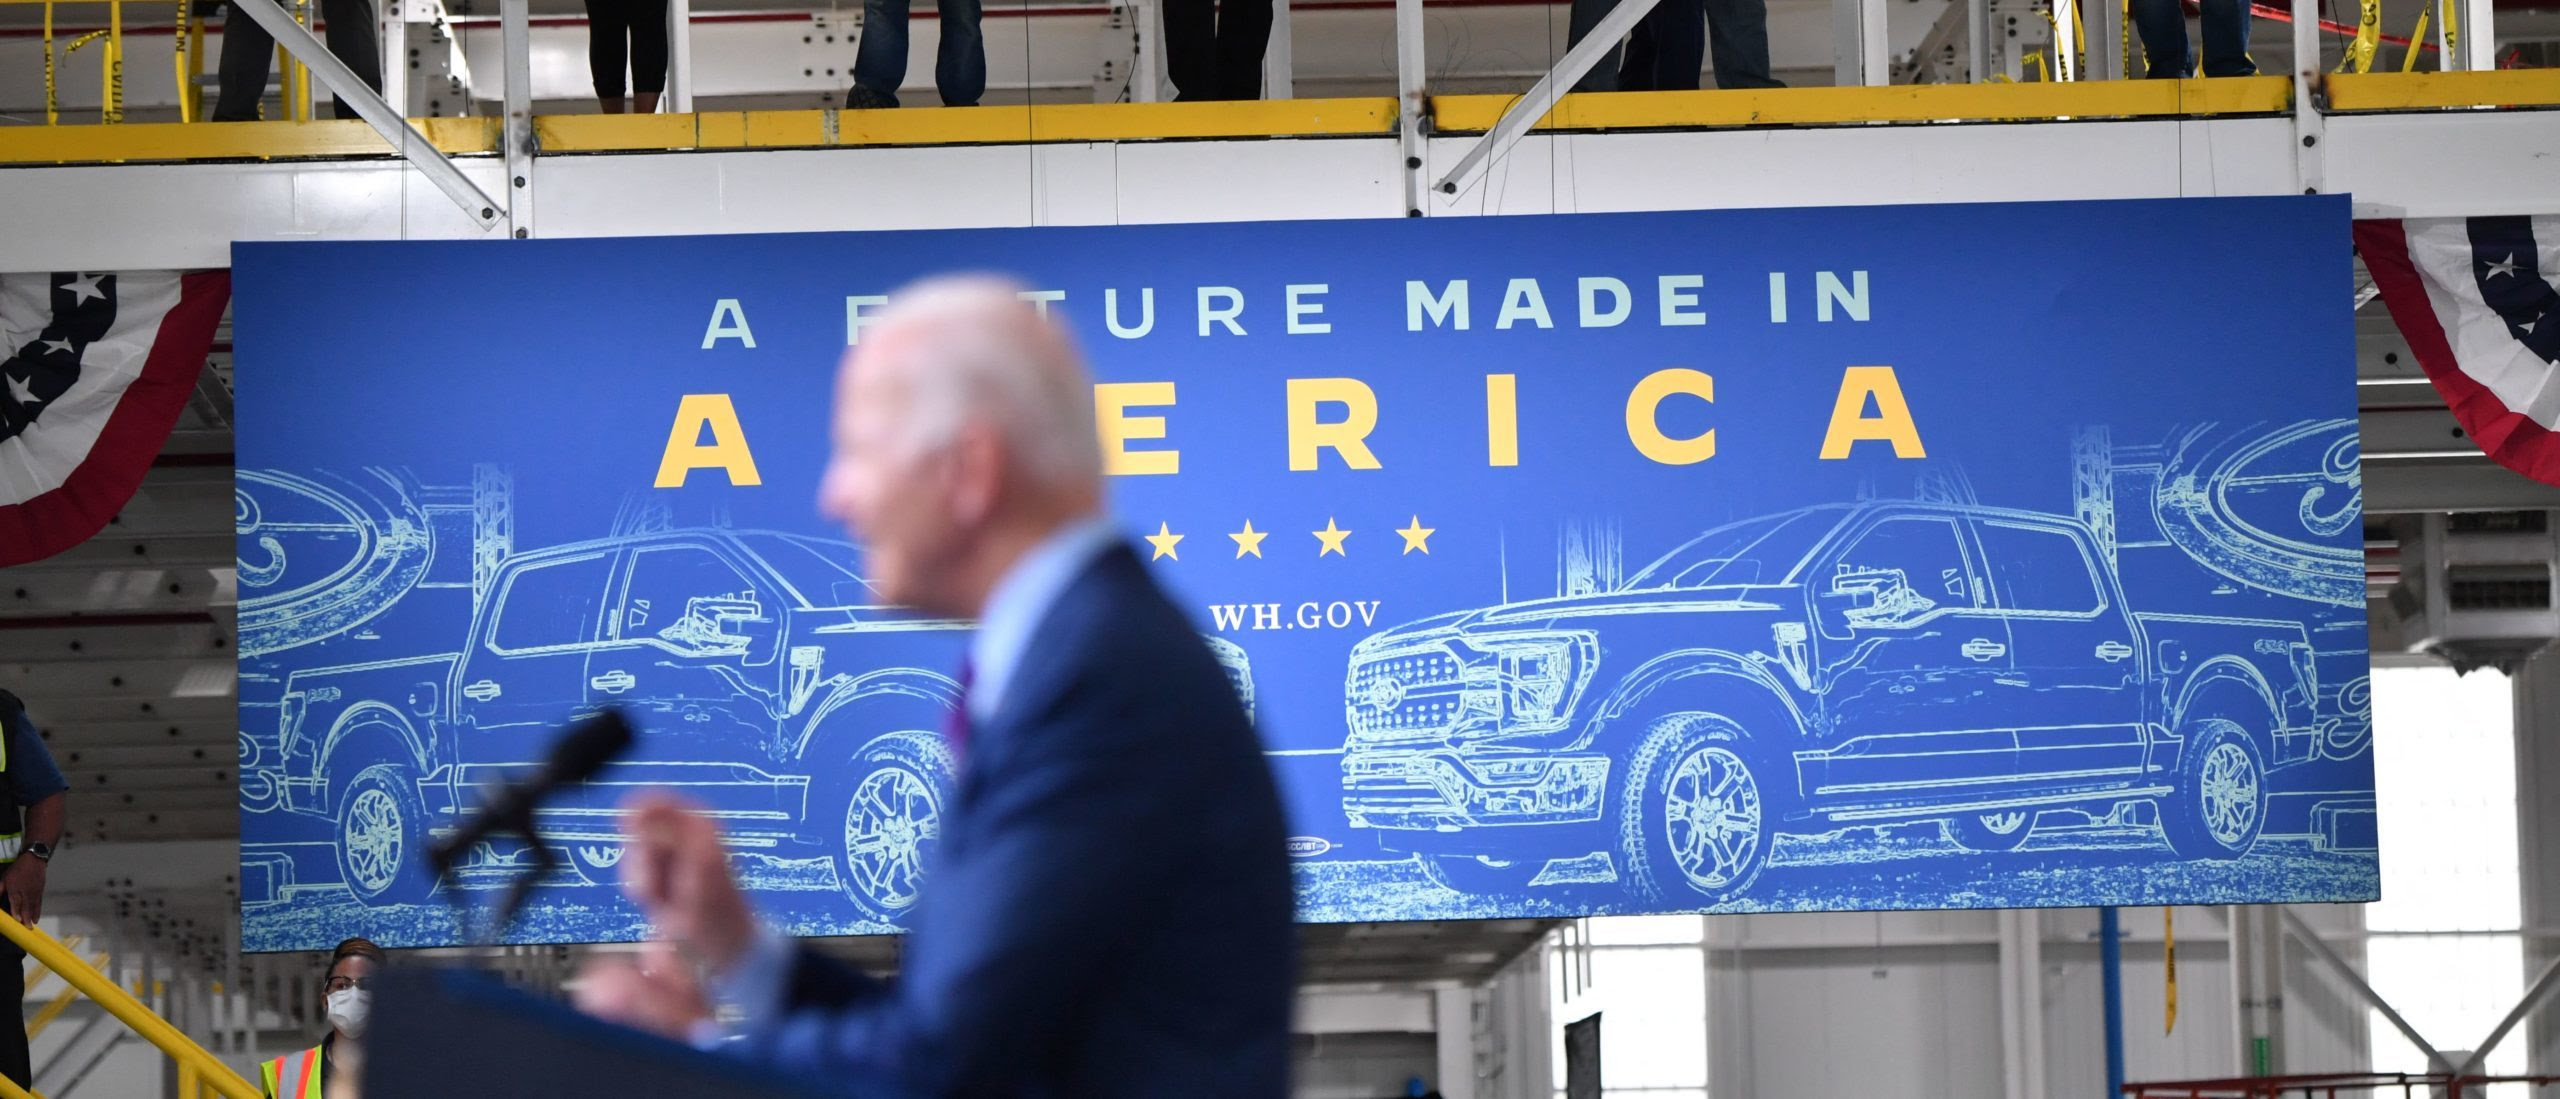 US Automakers Ford And GM Amp Up Electric Vehicle Push After White House Meeting